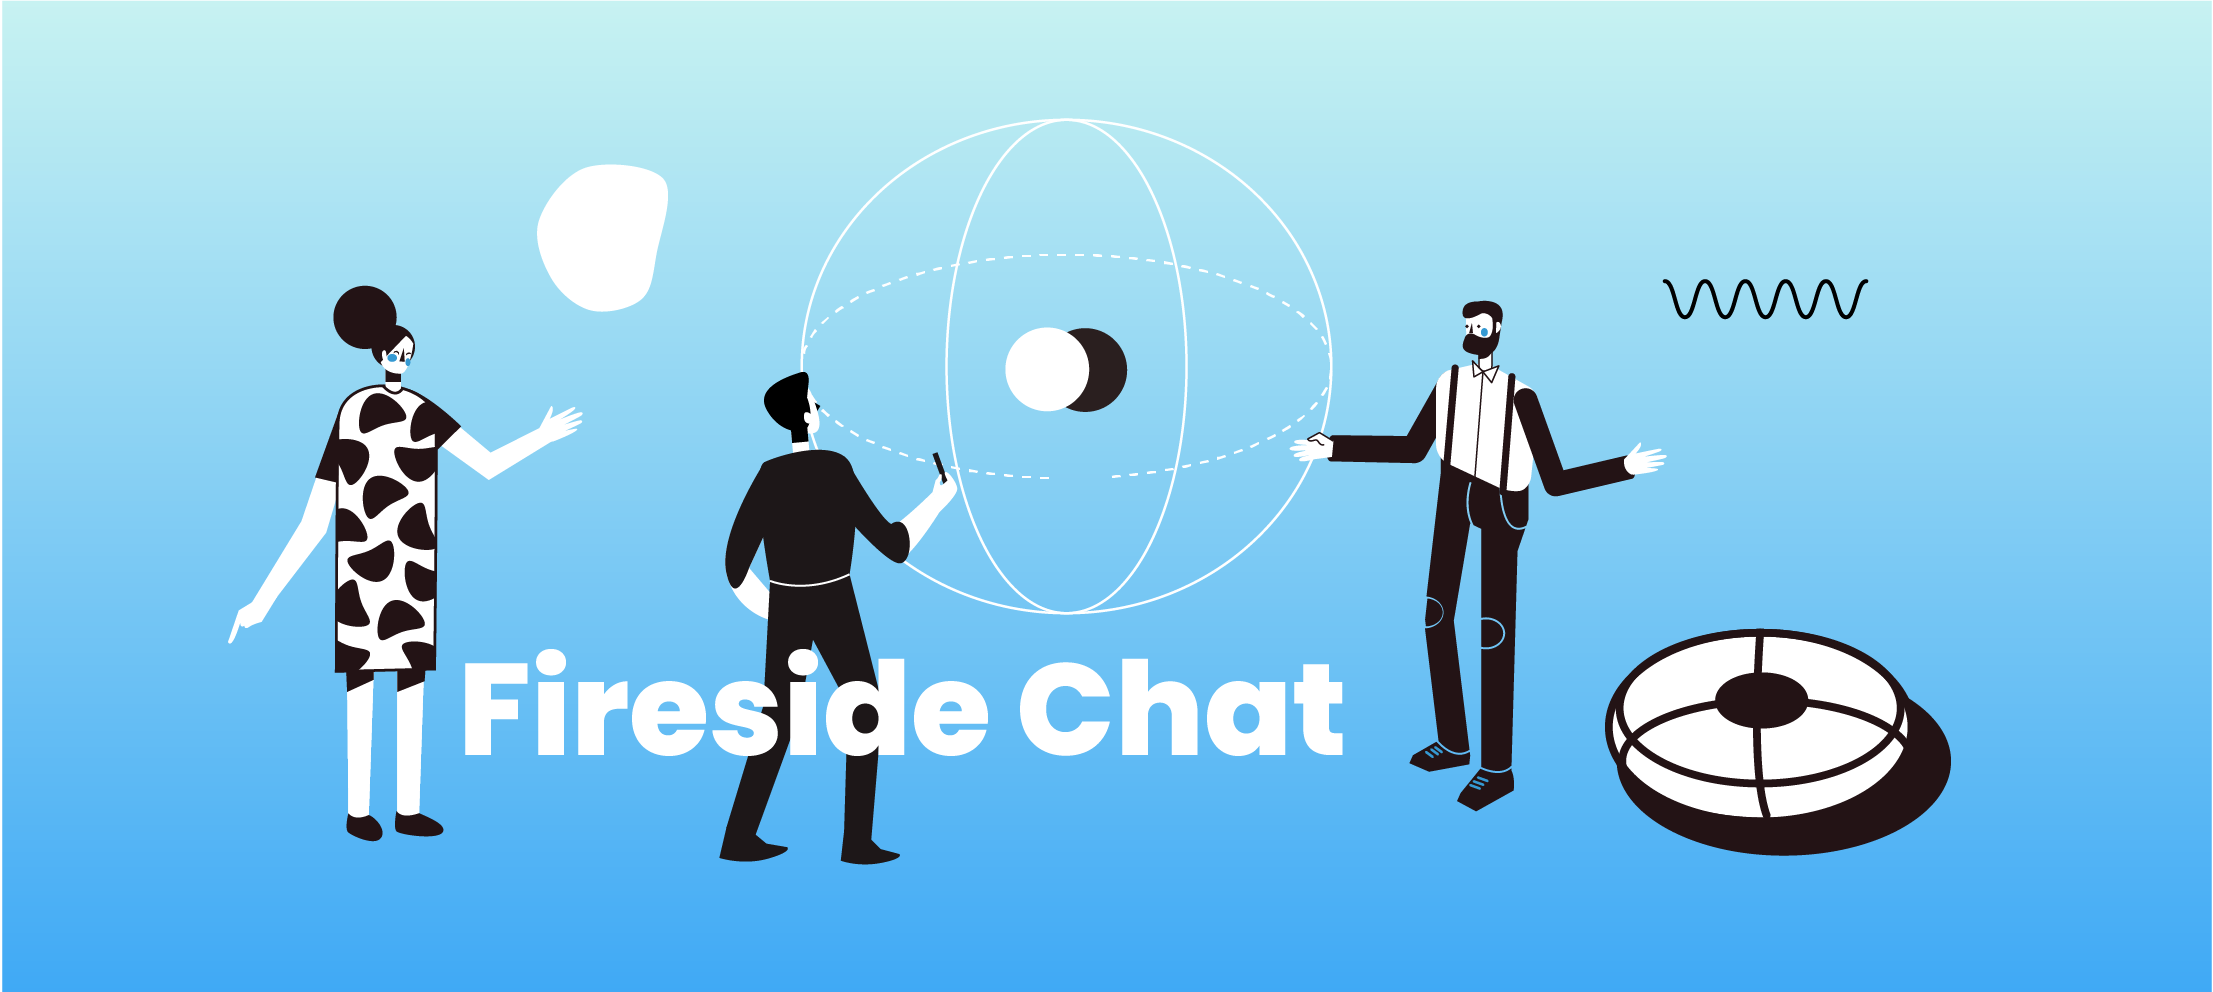 Illustrated banner image for the Fireside Chat event.